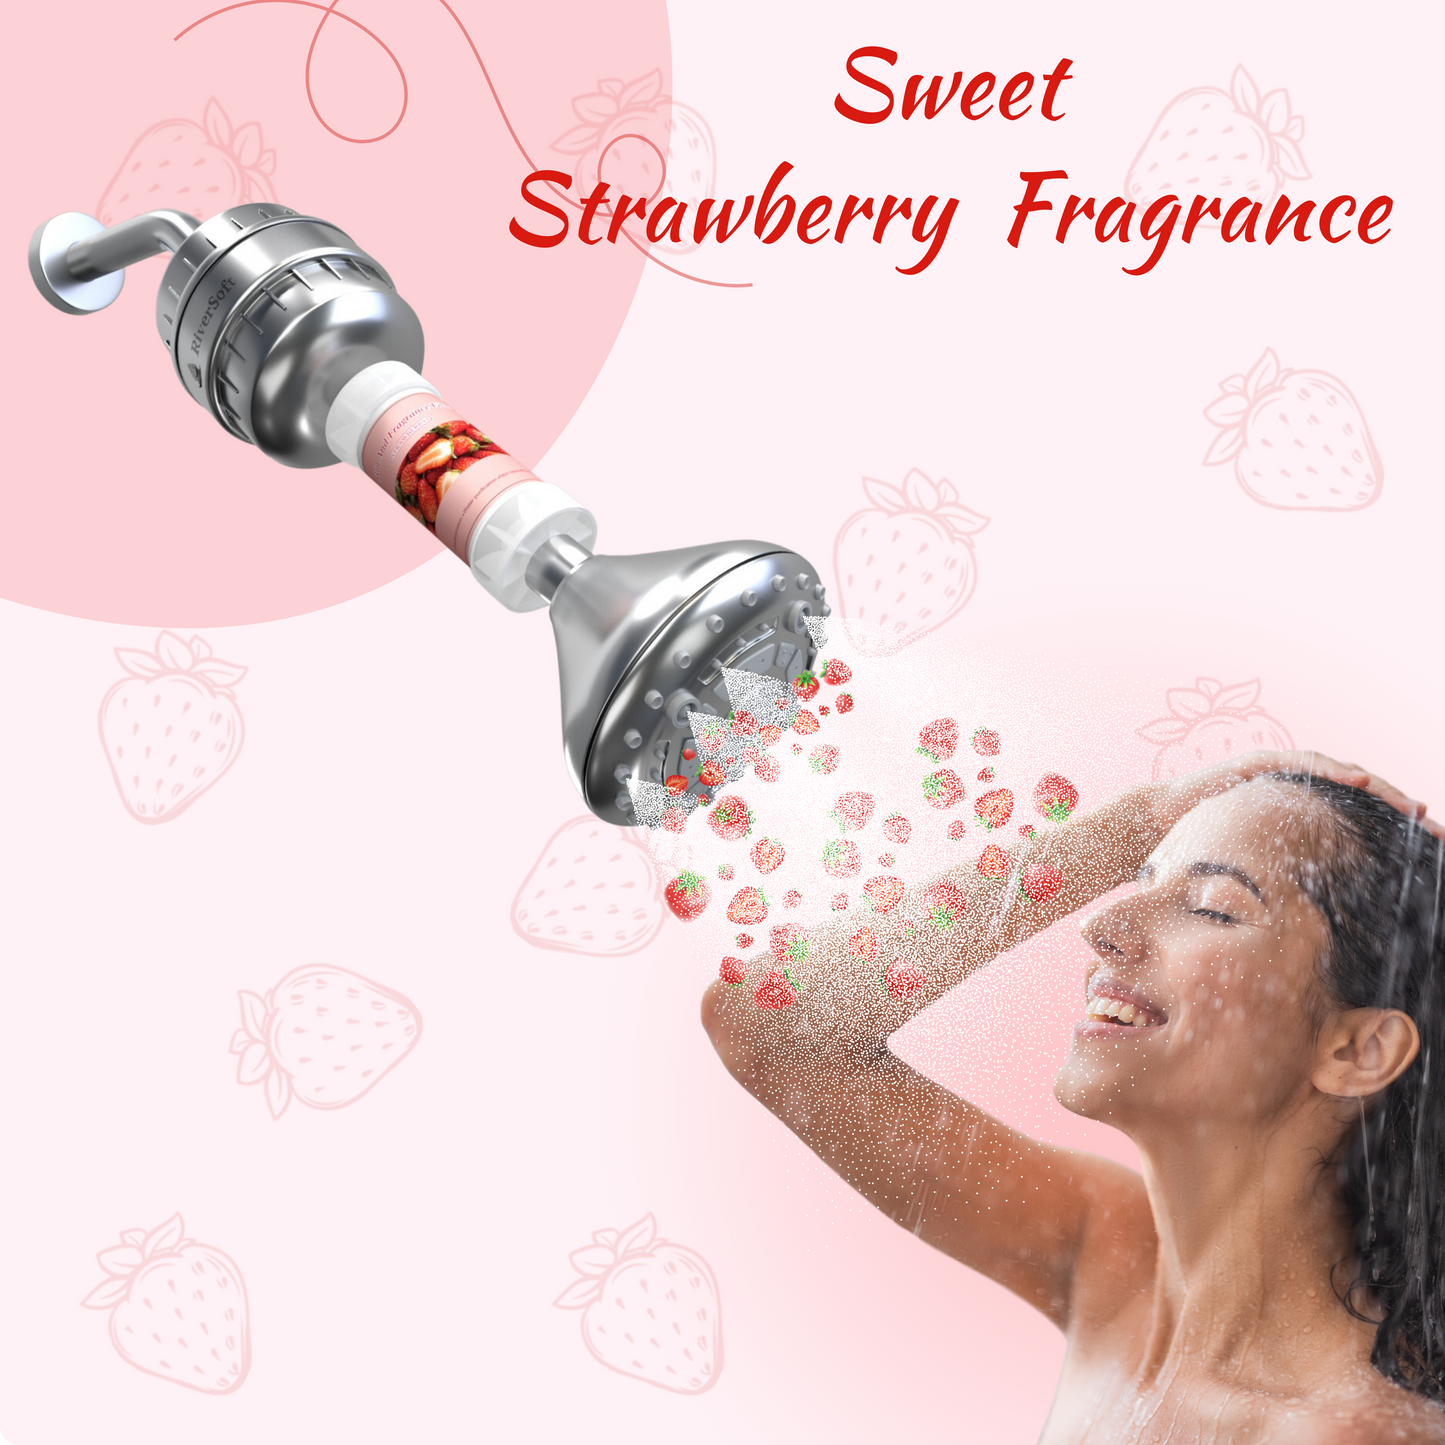 Fragrance Shower filter for hard water and chlorine with Skin and Fragrance filter | Strawberry Fragrance | Removes odor